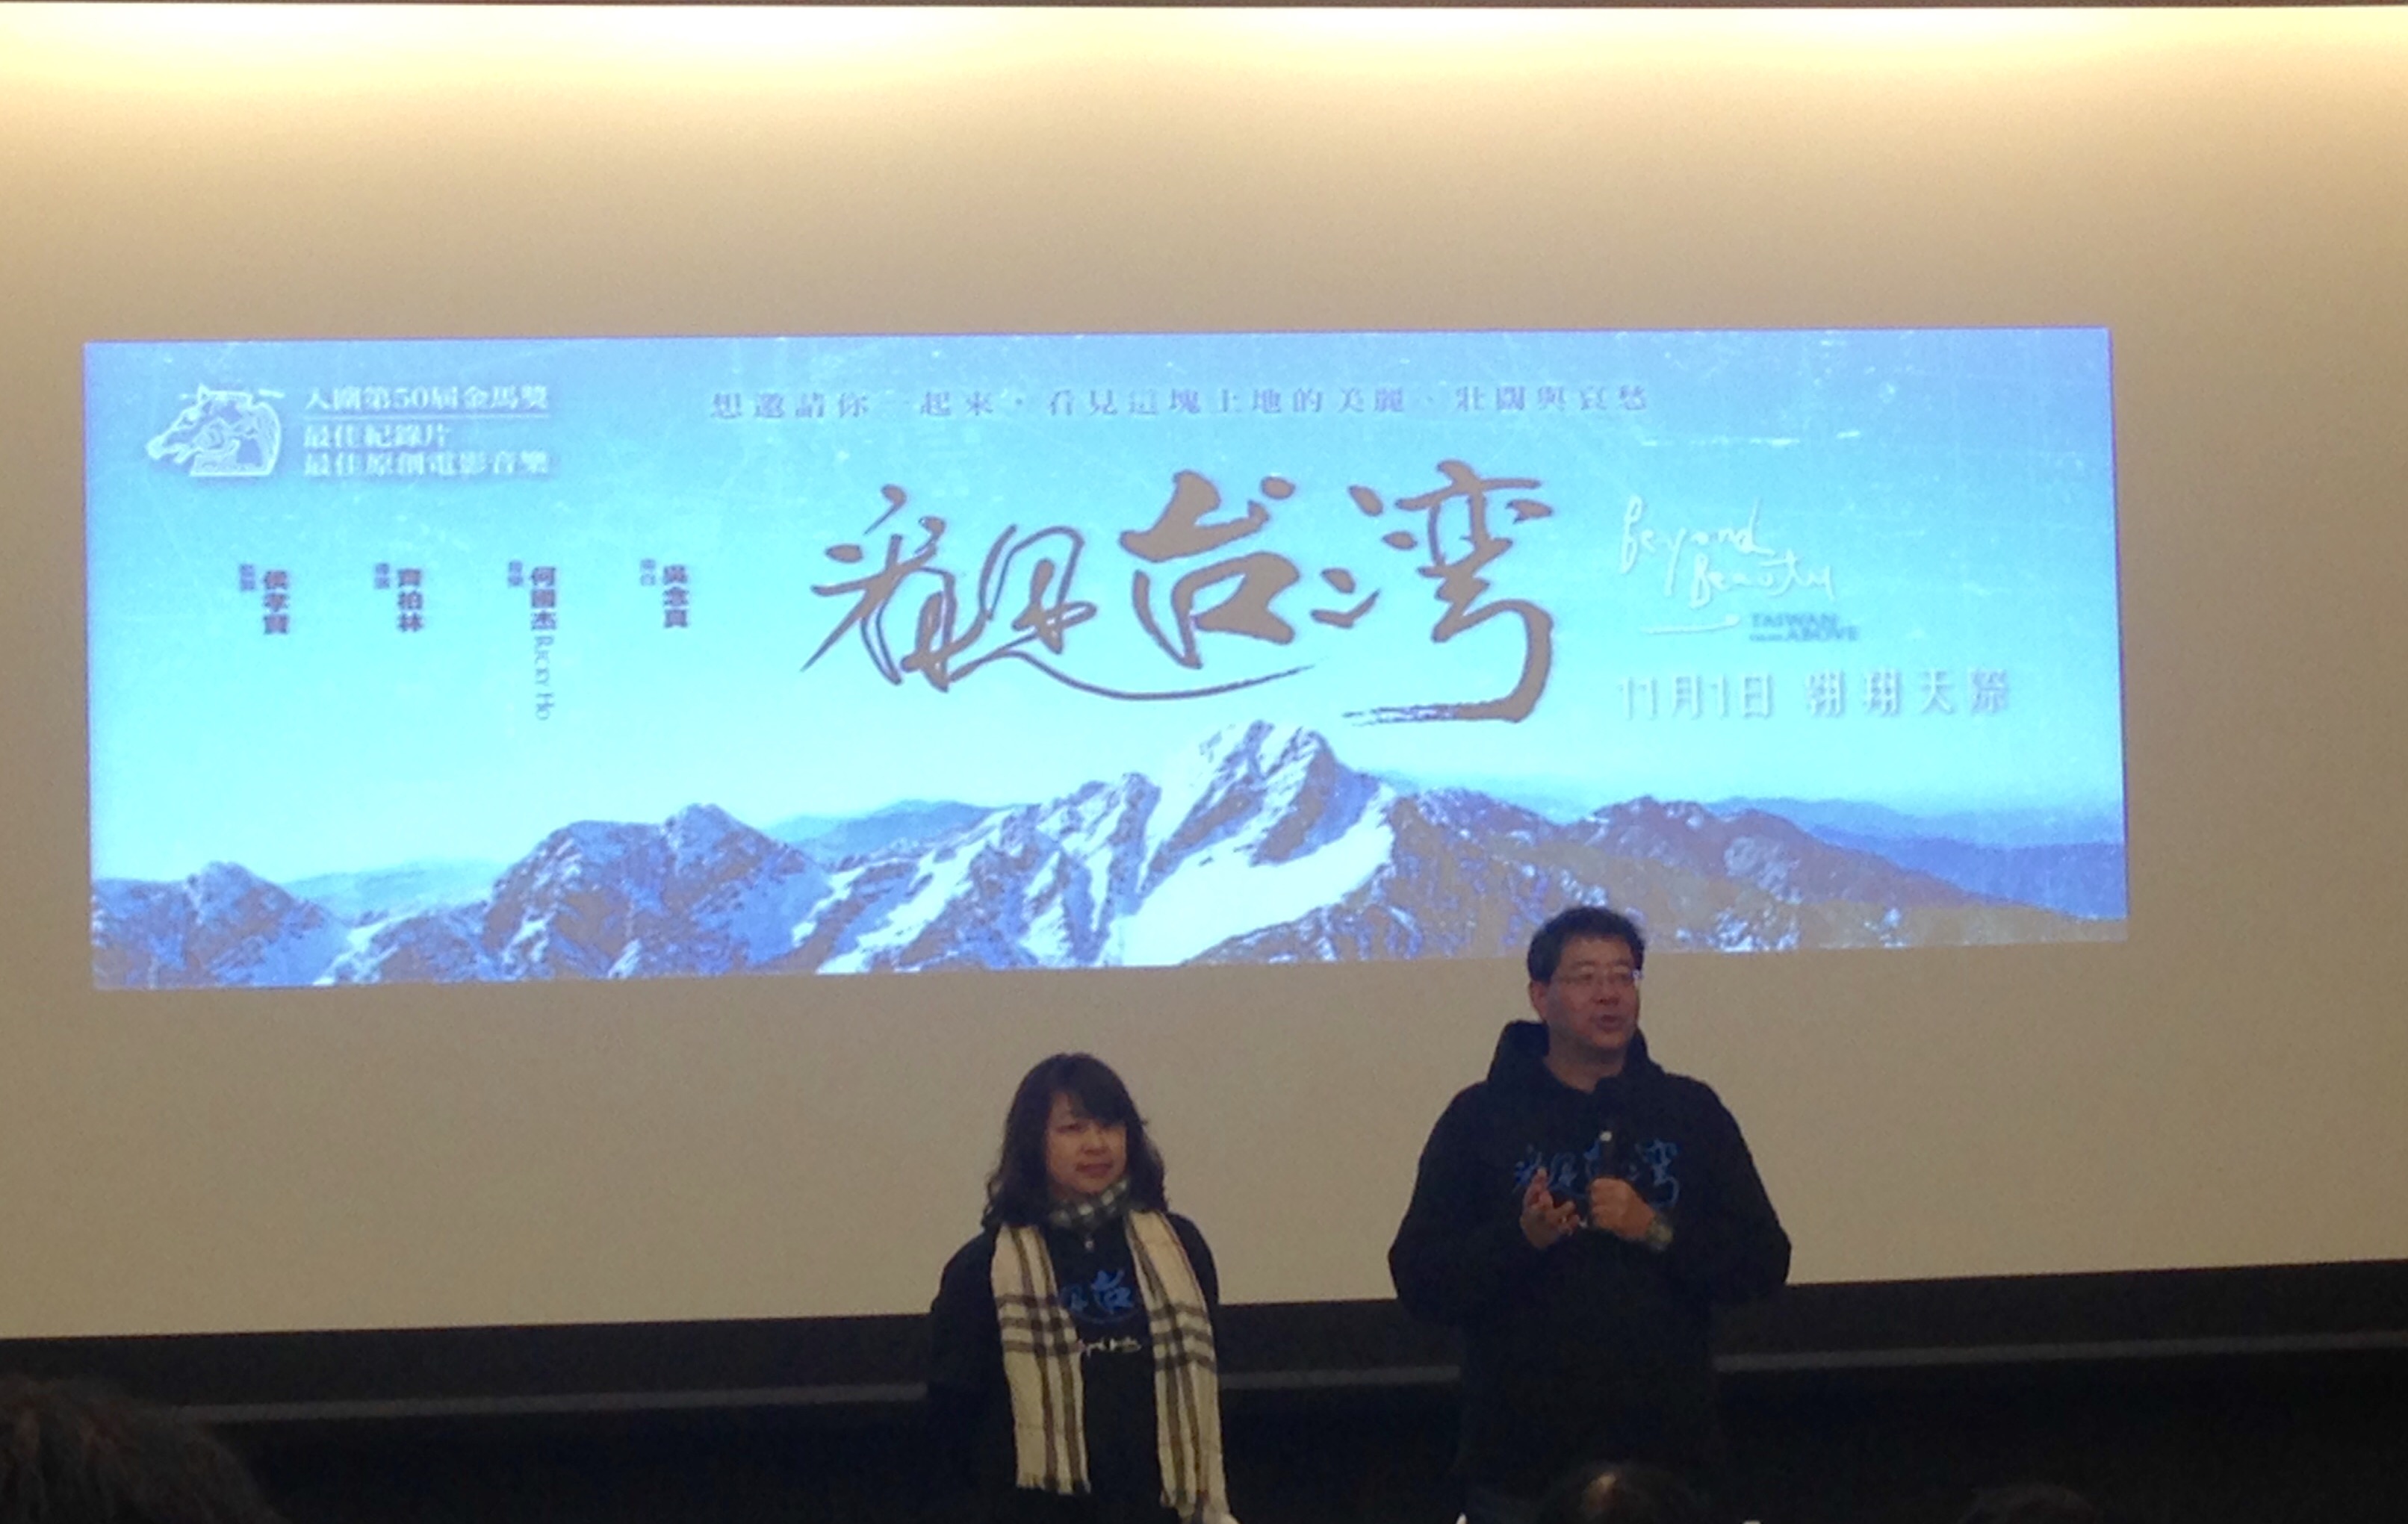 Harvard University Screening of “Beyond Beauty: Taiwan From Above” Highlights Environmental Protection Issues in Taiwan